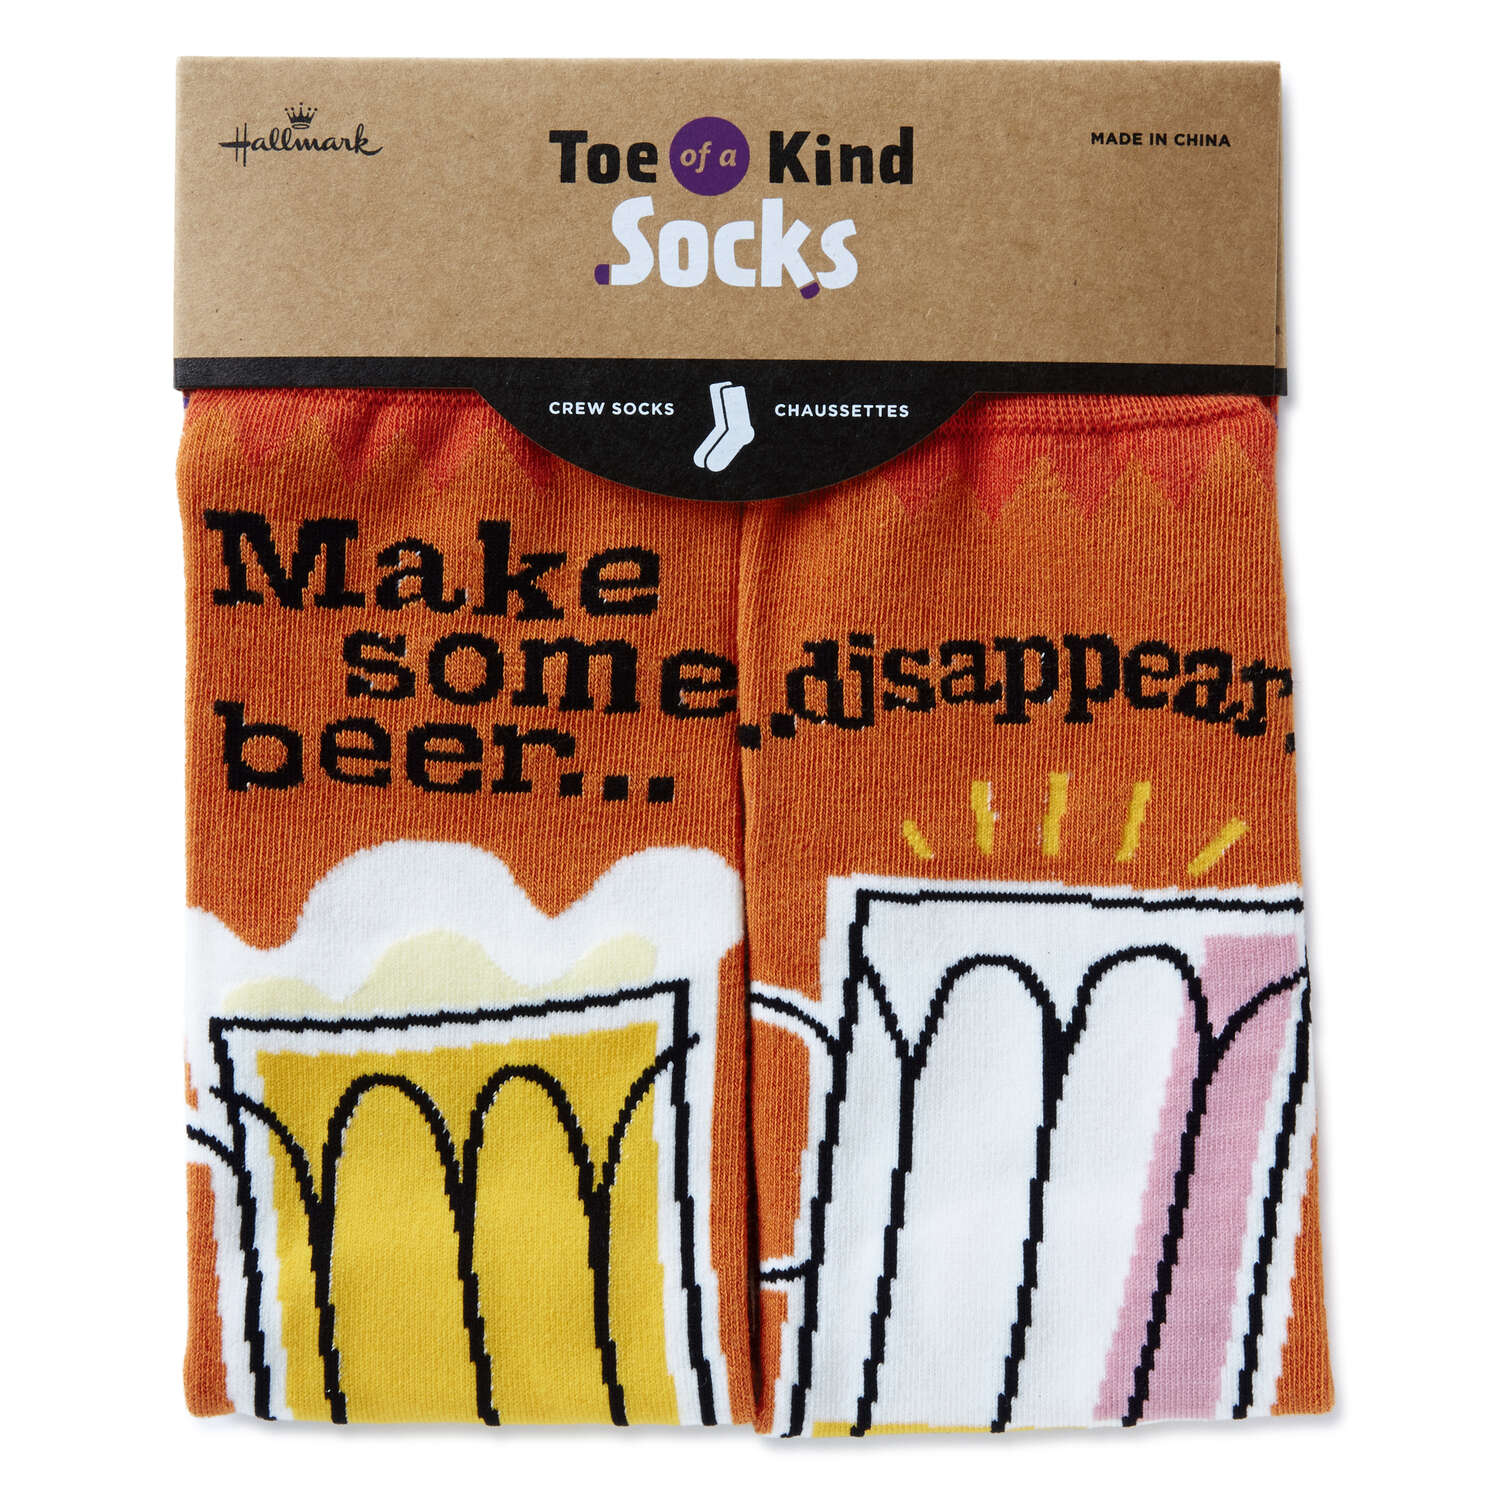 Make some beer disappear socks (2 pair) - and many other socks $19